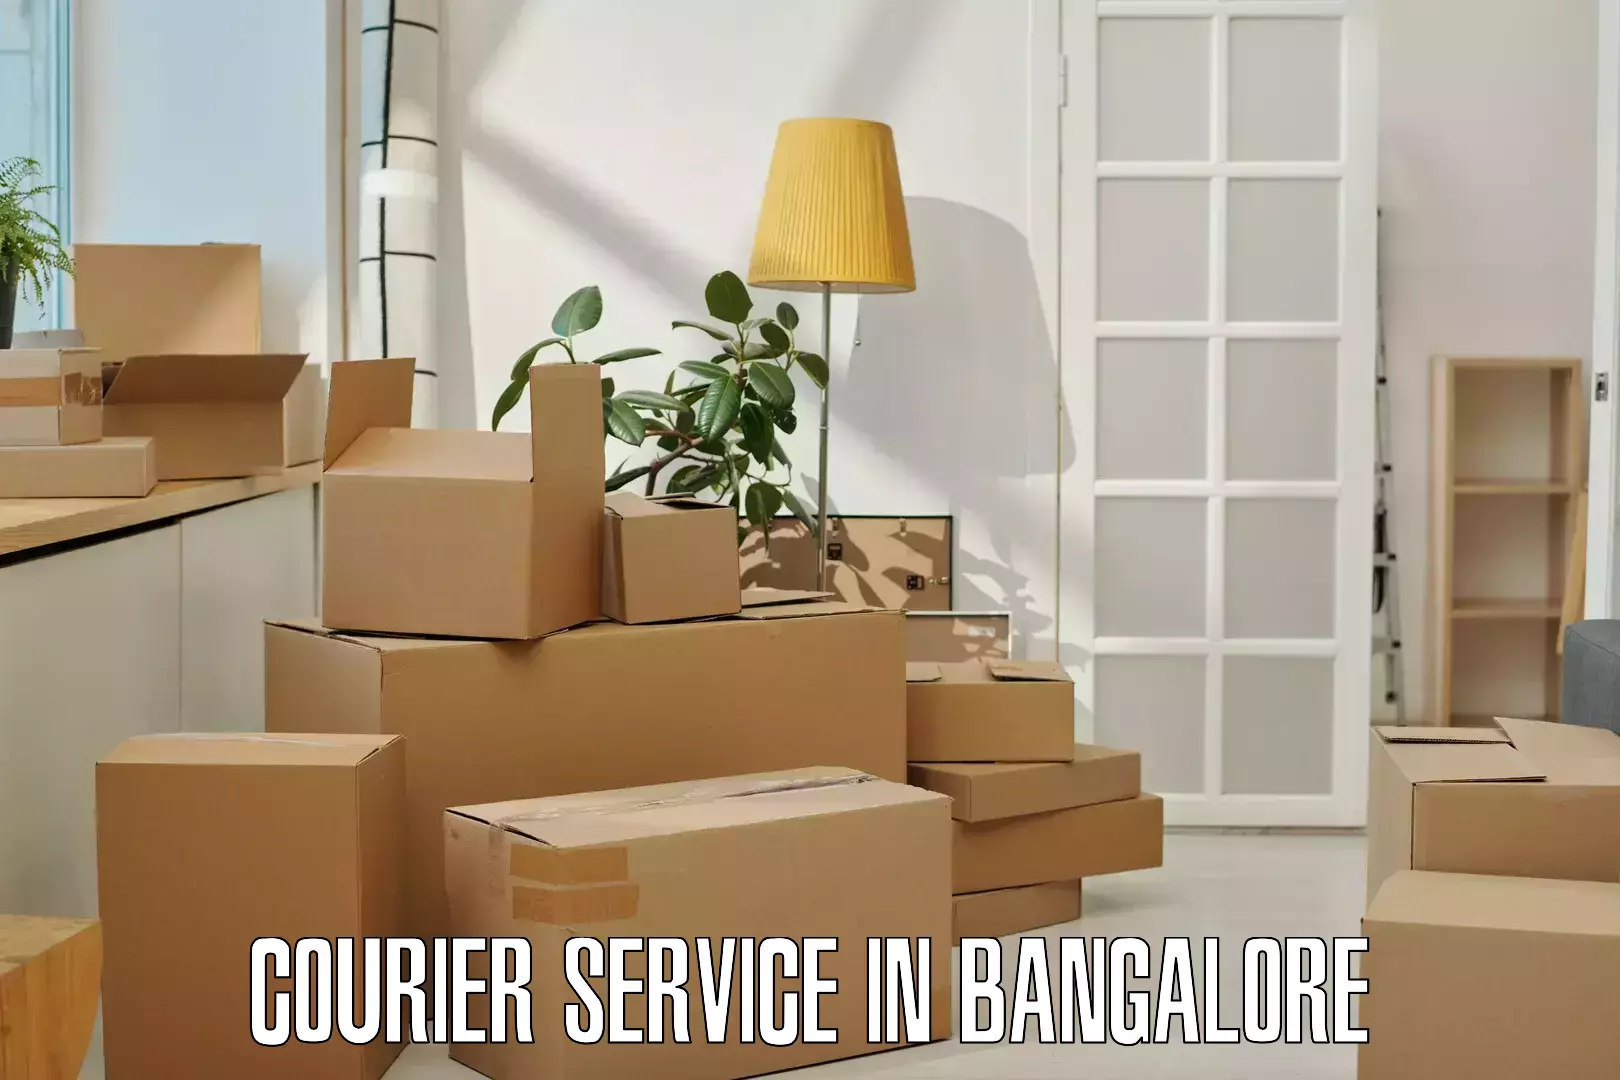 Advanced delivery network in Bangalore